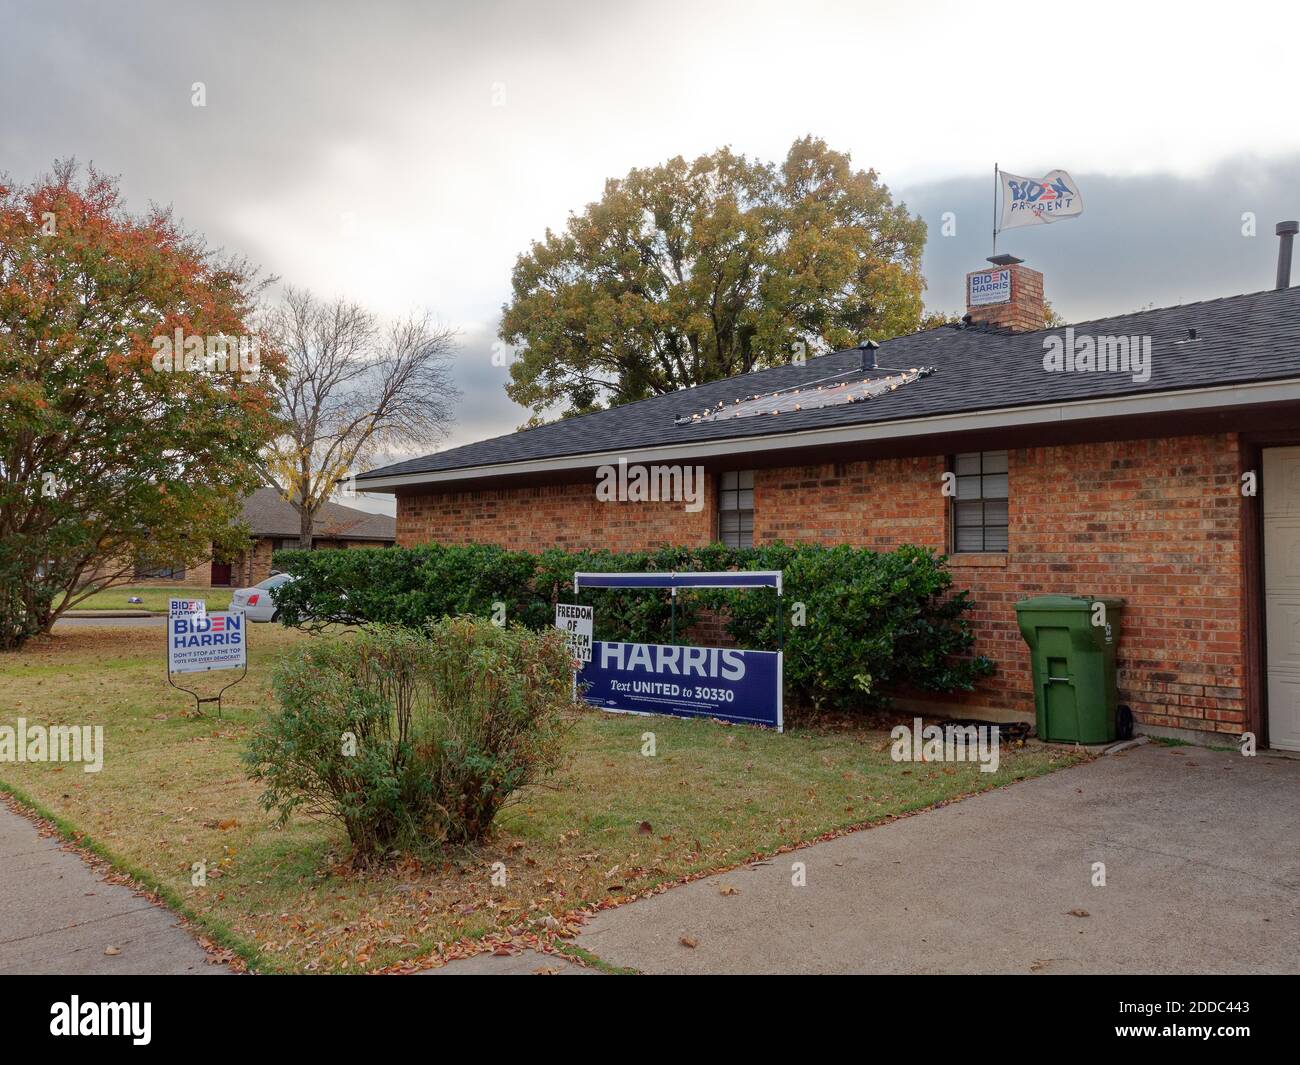 Arlington, Texas-24 Nov 2020: Biden campaign sign defaced in the homeowners lawn in a conservative pro-Trump Texas suburb outside of Dallas, Texas. With former United States vice-president Joe Biden winning the 2020 presidential election a homeowner posts 'Freedom of Speech Really?' sign along with elect Biden flag flying high out of reach of Trump supports. During the ection Trump supports defaced the sign in the front yard, cutting out Biden's name. (Unable to remove sign, but able to cut out the Biden name) Stock Photo